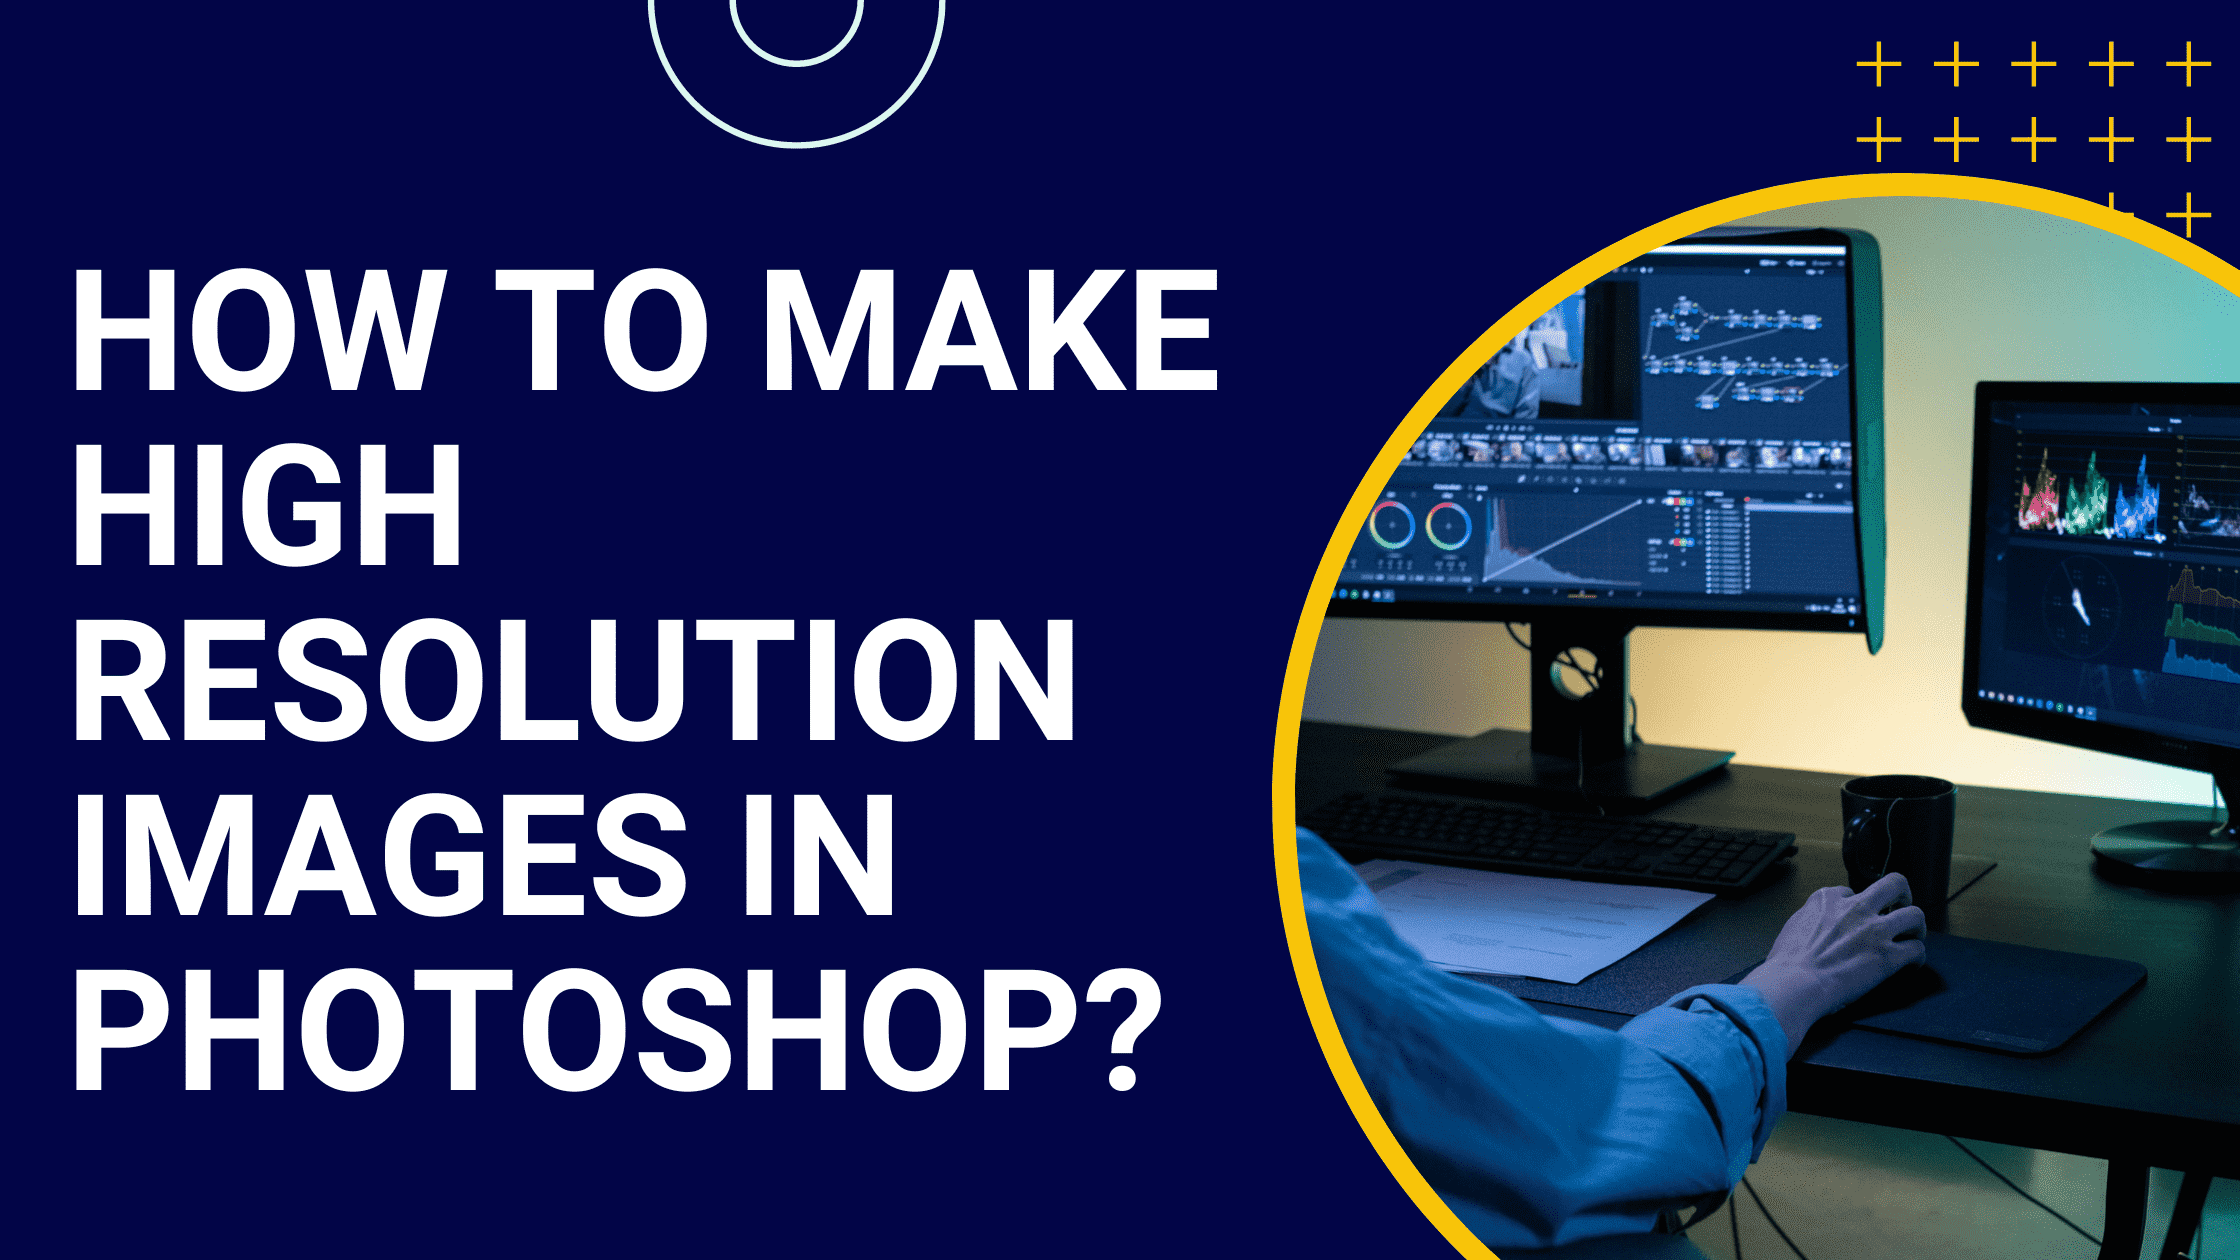 How to make high resolution images in Photoshop?